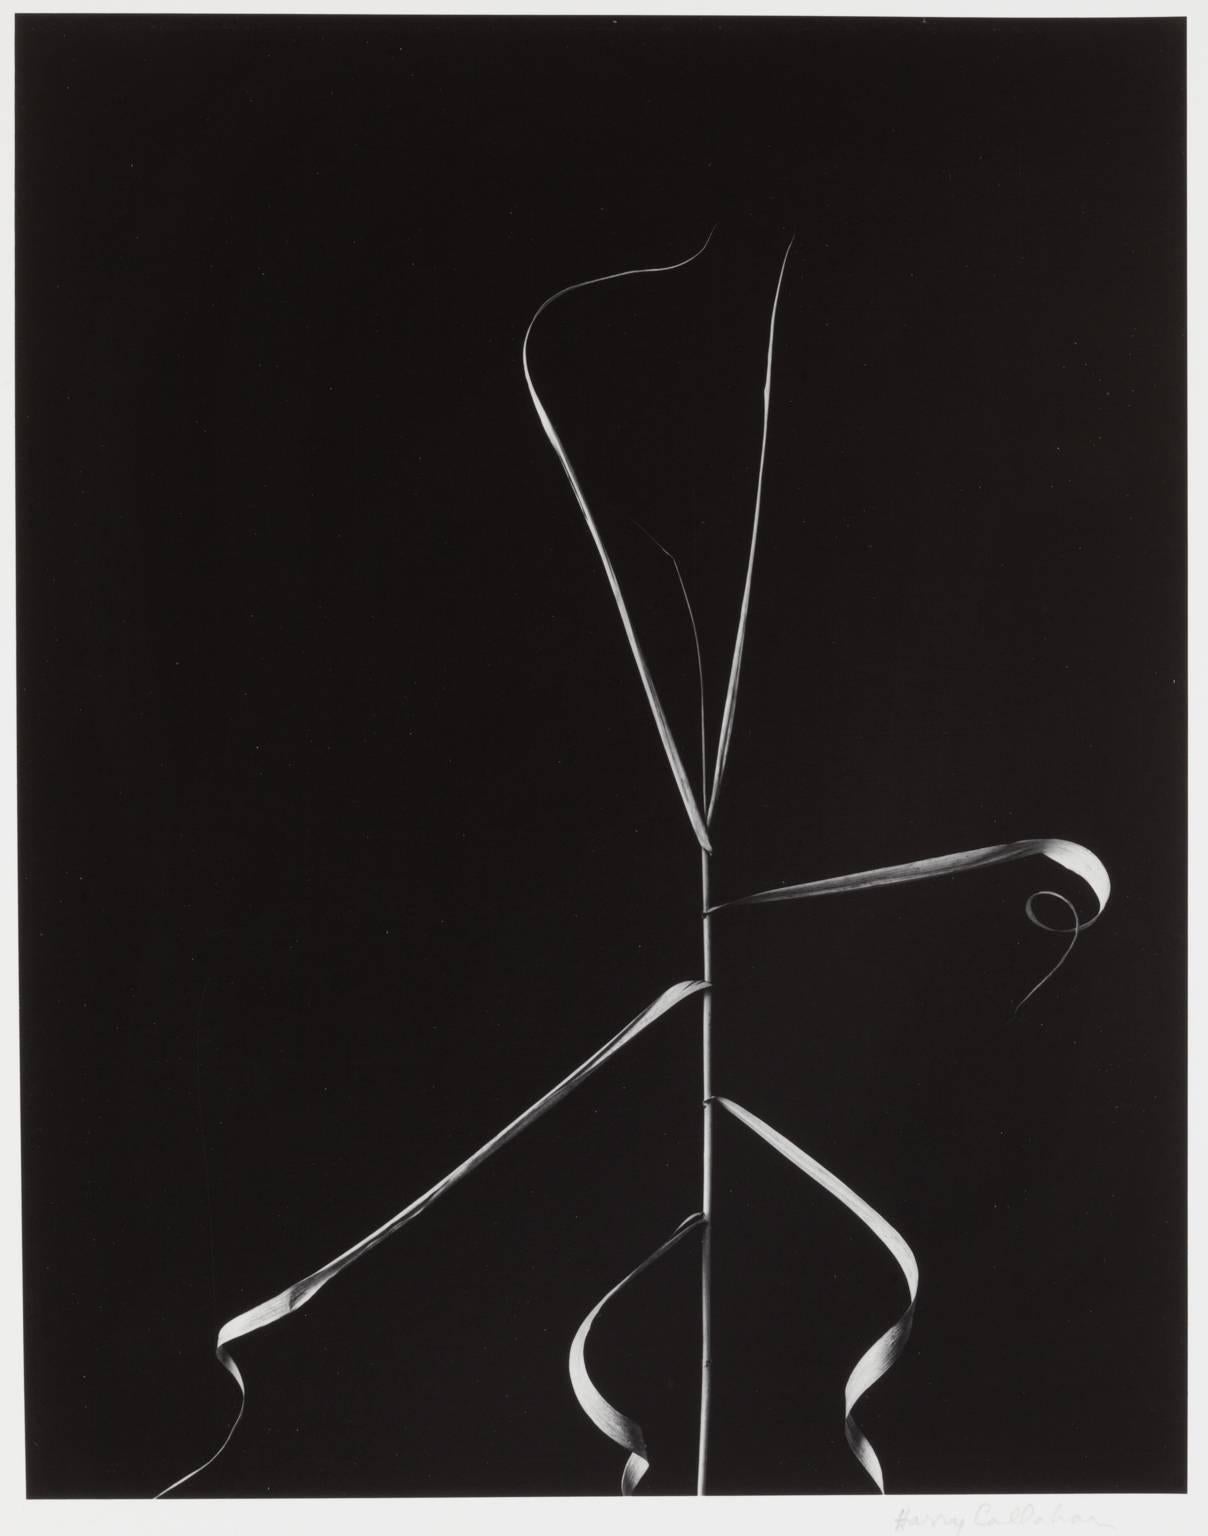 Weed, Aix-en-Provence - Modern Photograph by Harry Callahan